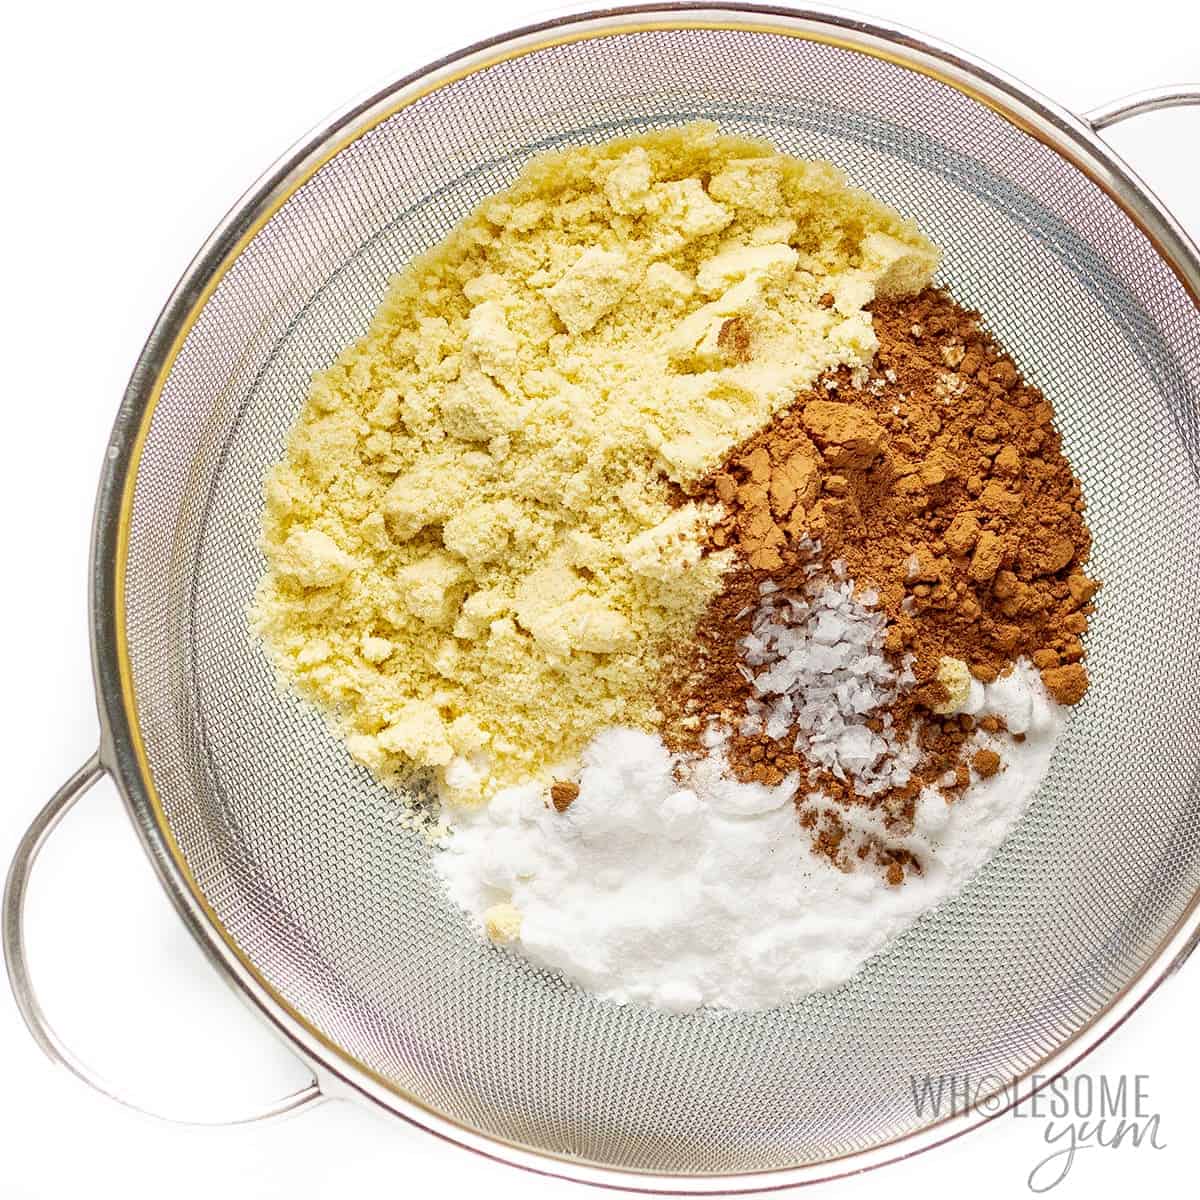 Dry ingredients for keto macarons in a sifter over a mixing bowl